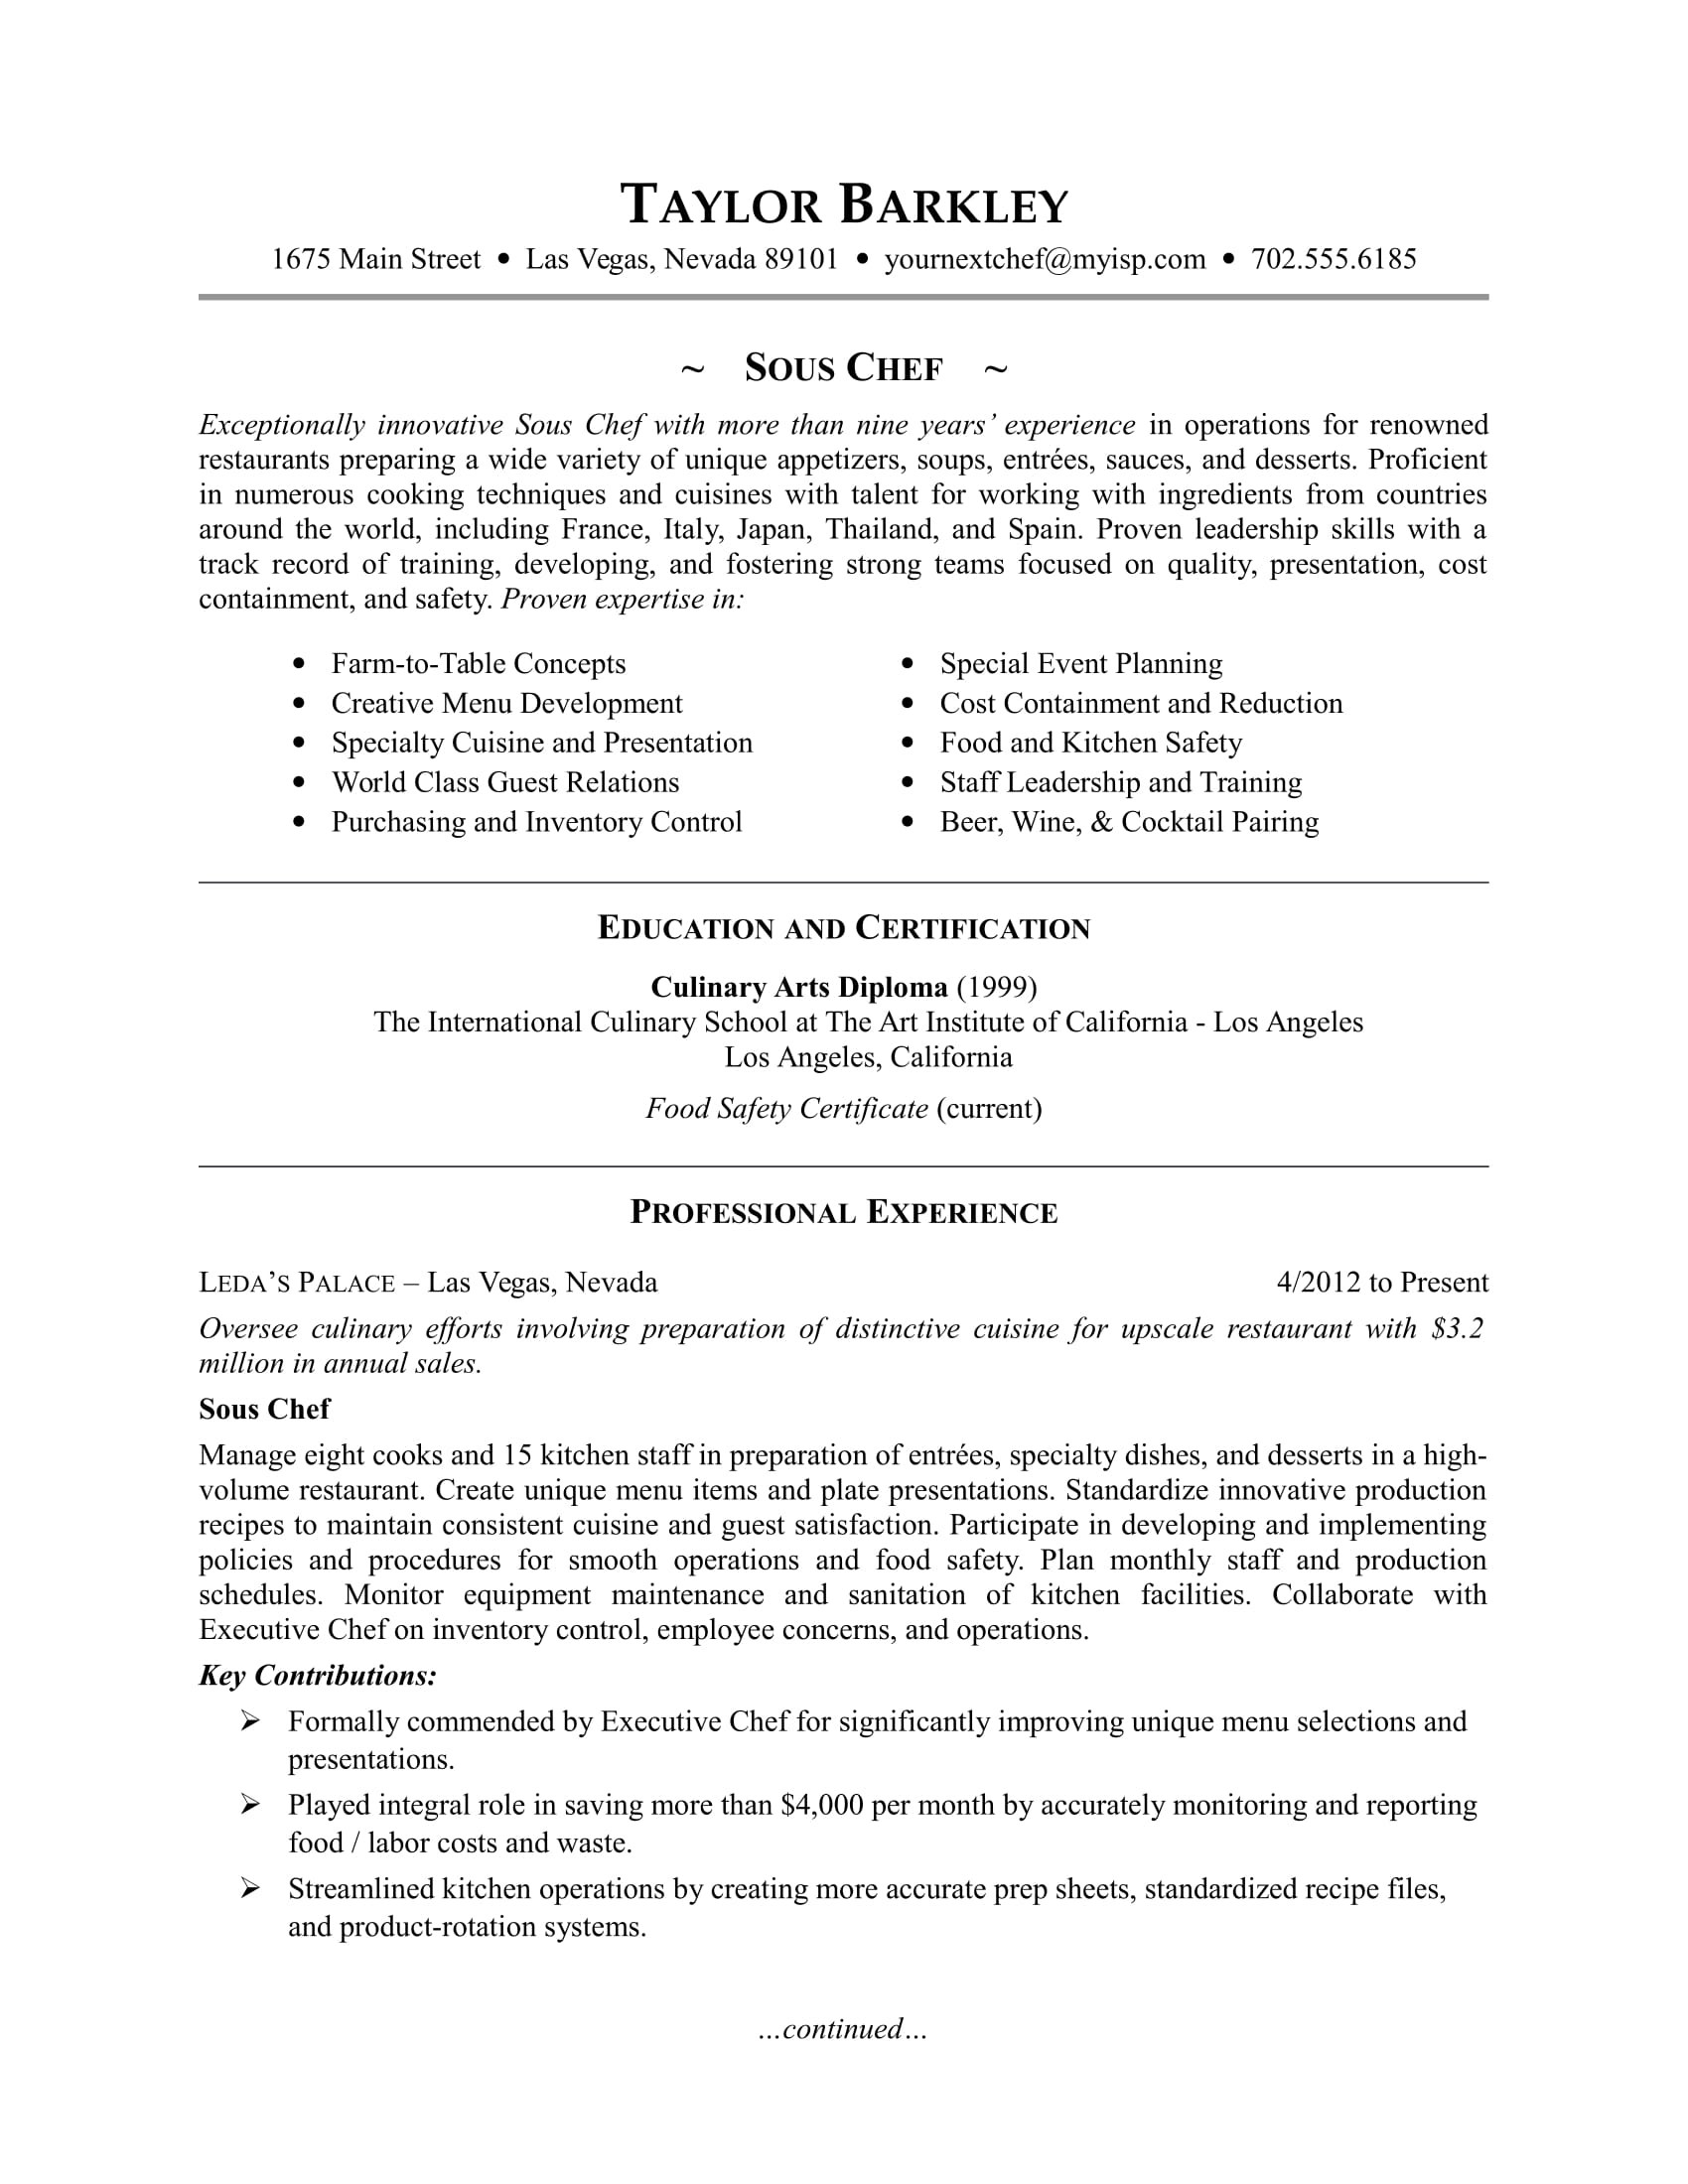 sample resume sous chef